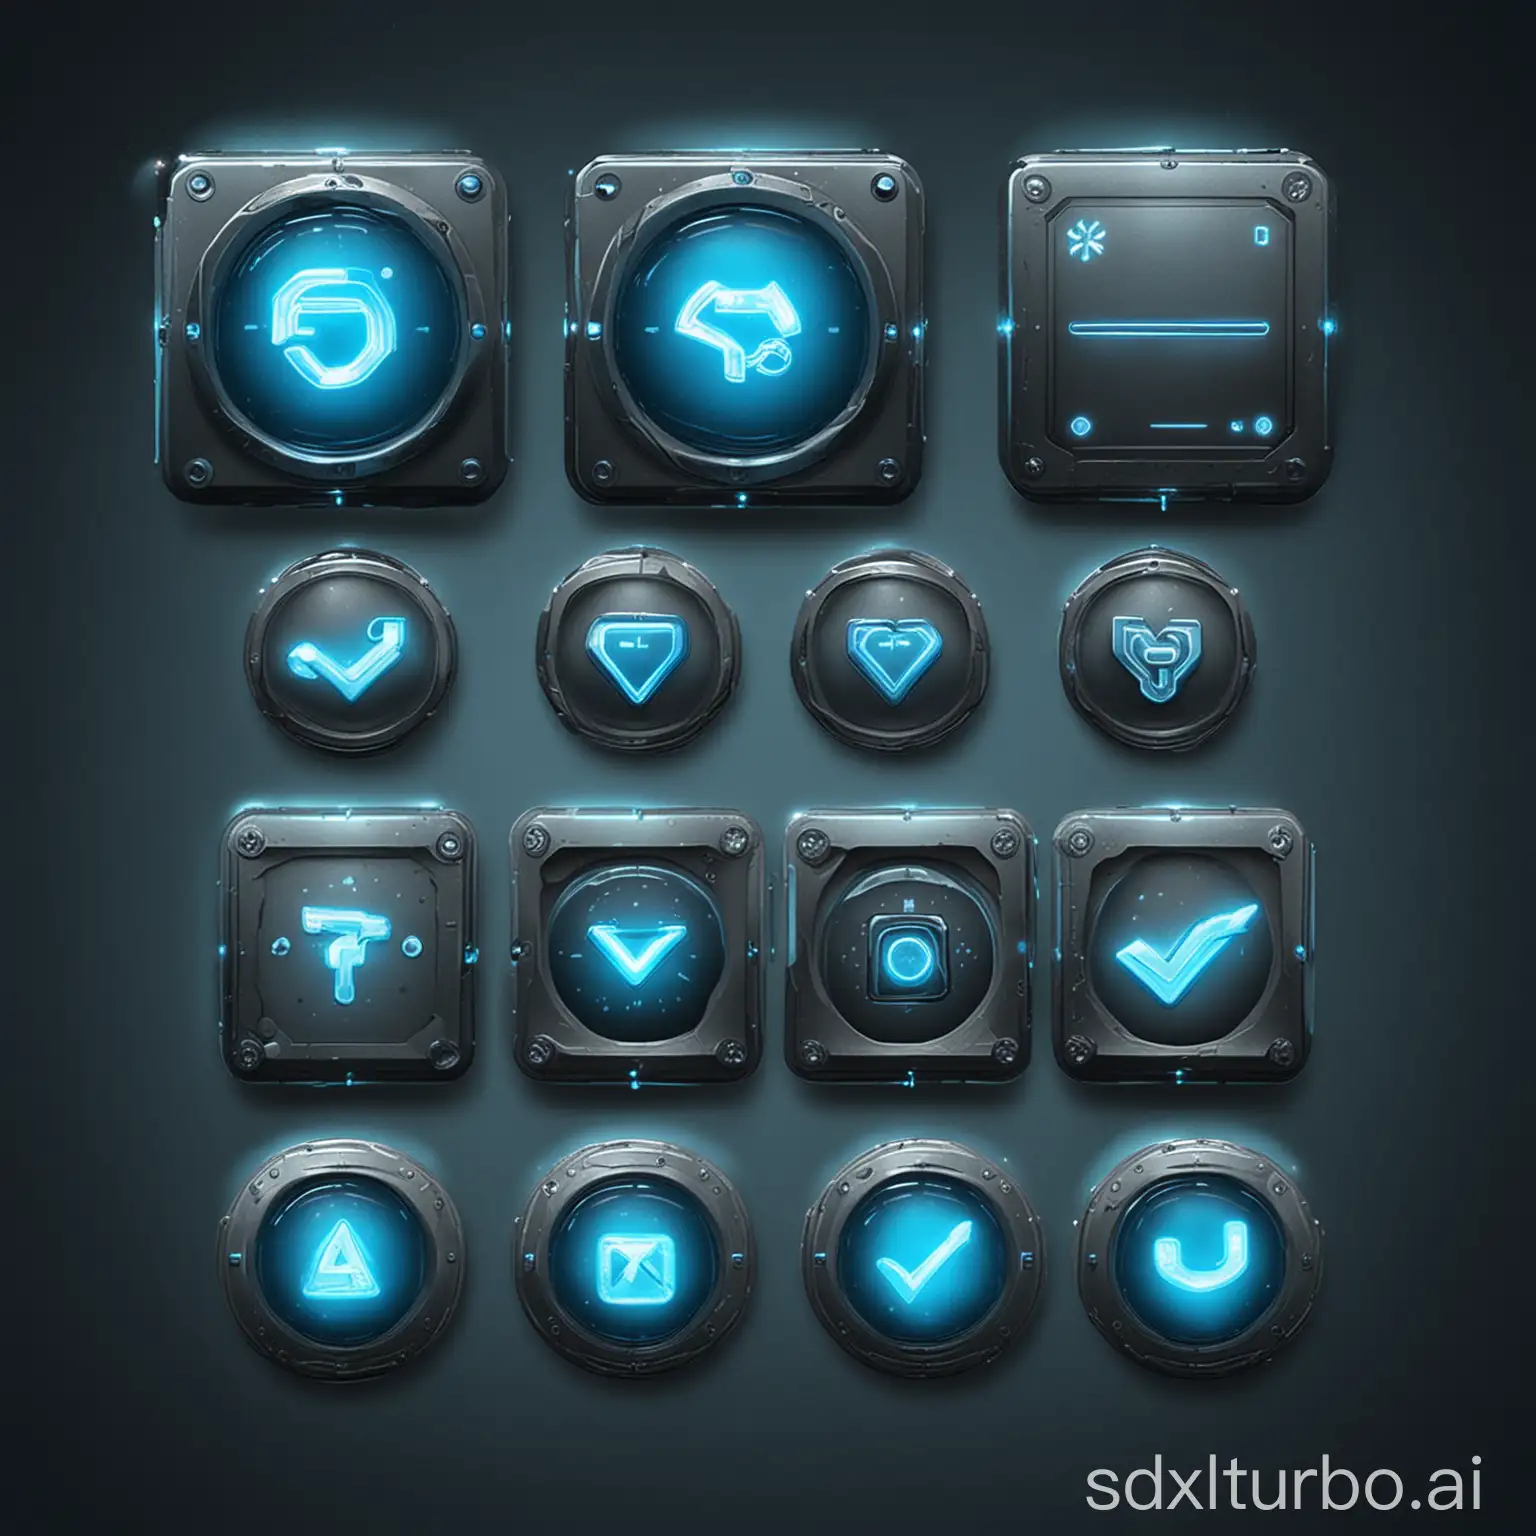 a collection of menu icon button with a checkbox symbol, GUI element for a space game, metalic look with blue glowing lights